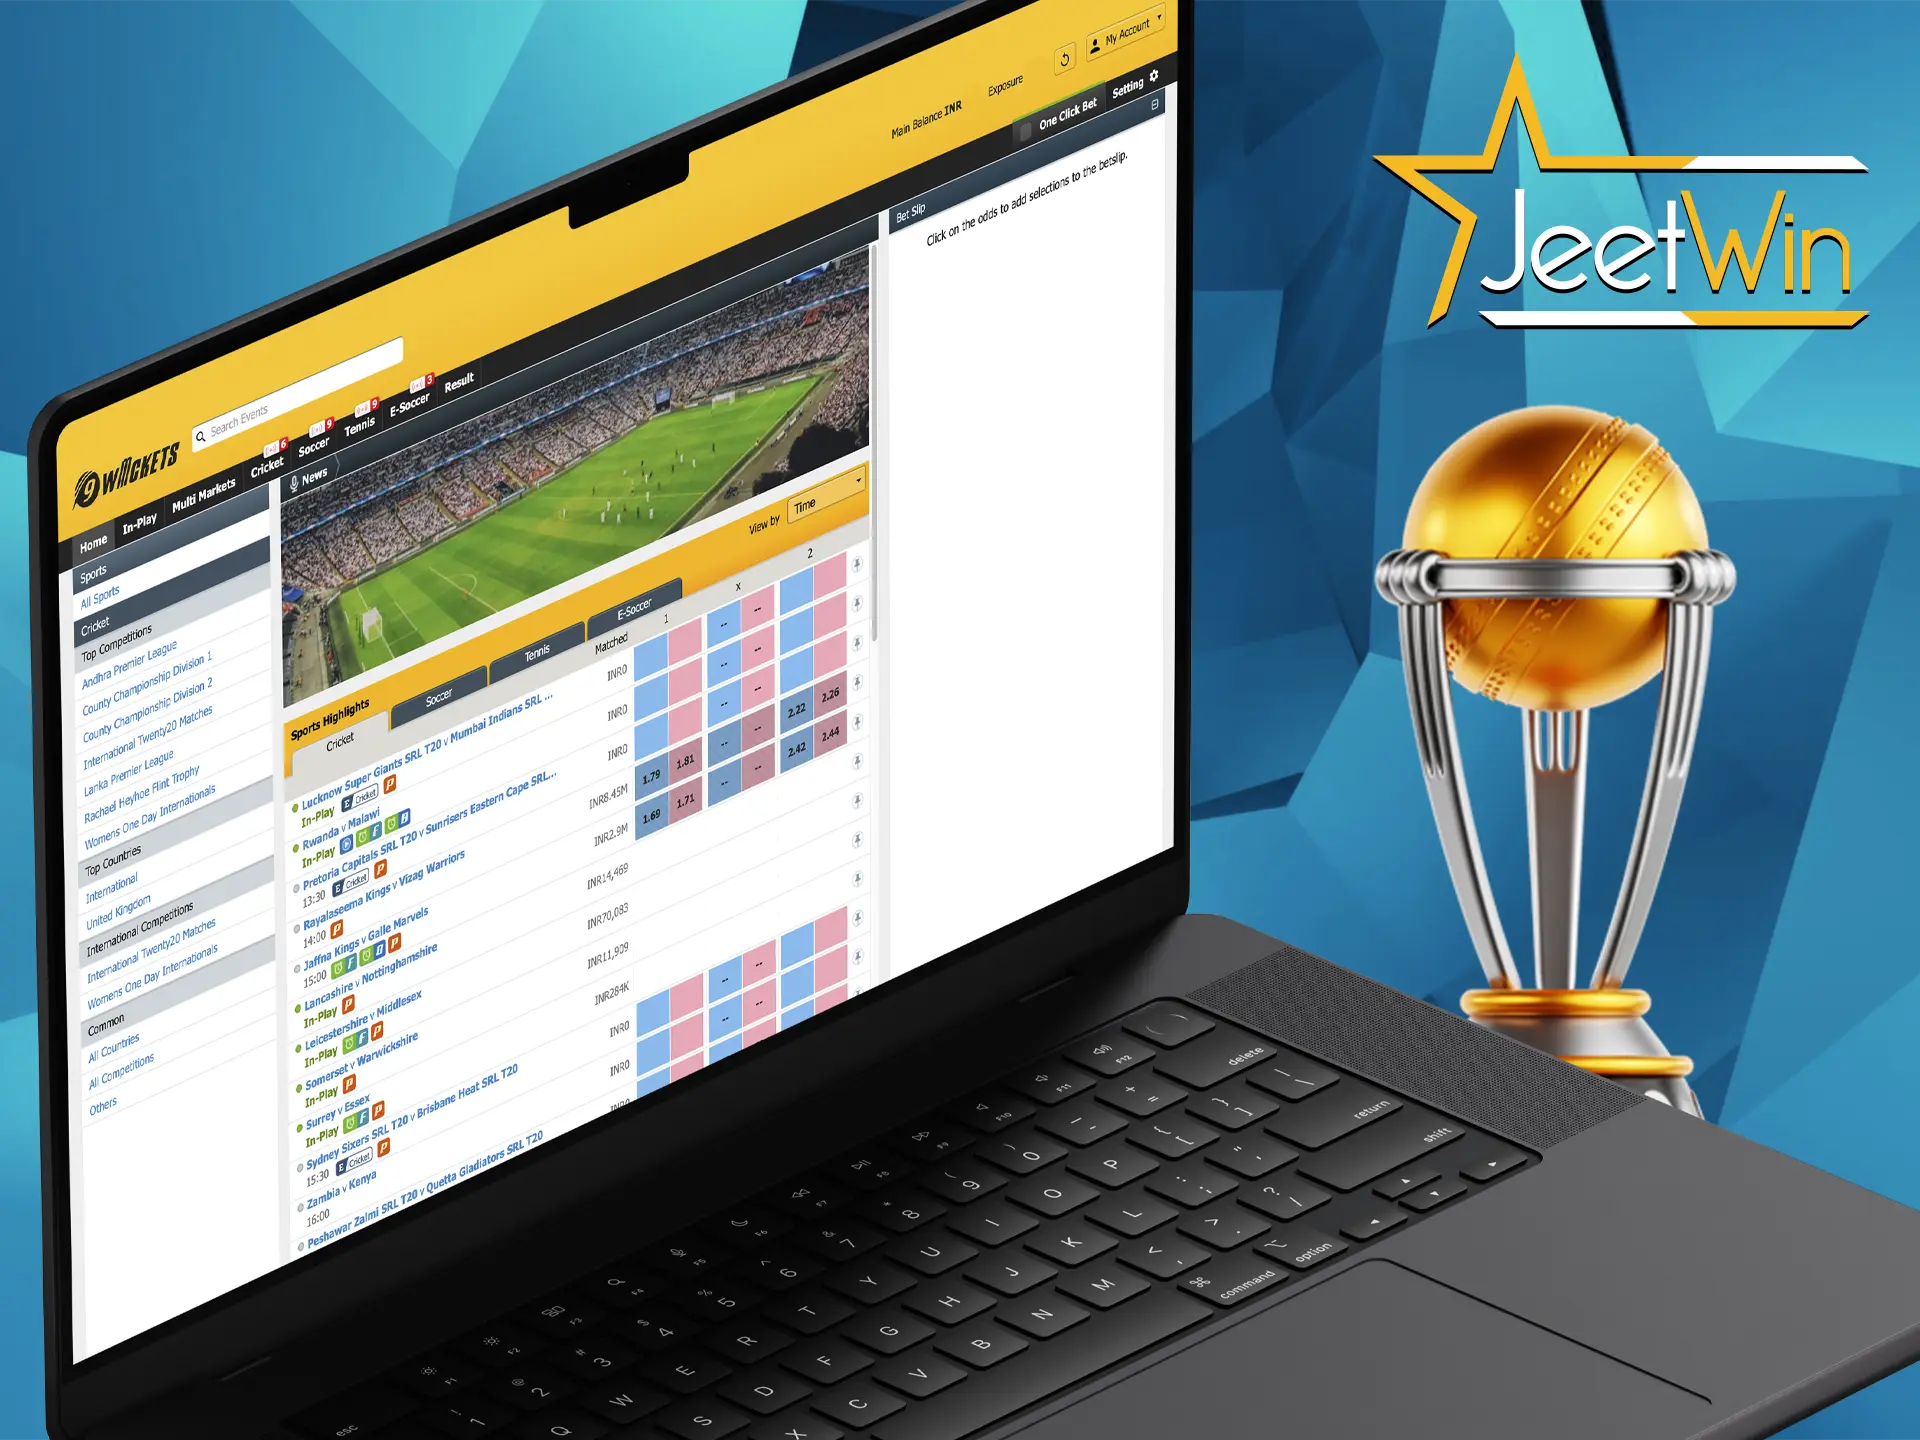 Every cricket fan can easily find their favourite tournament and bet at Jeetwin.